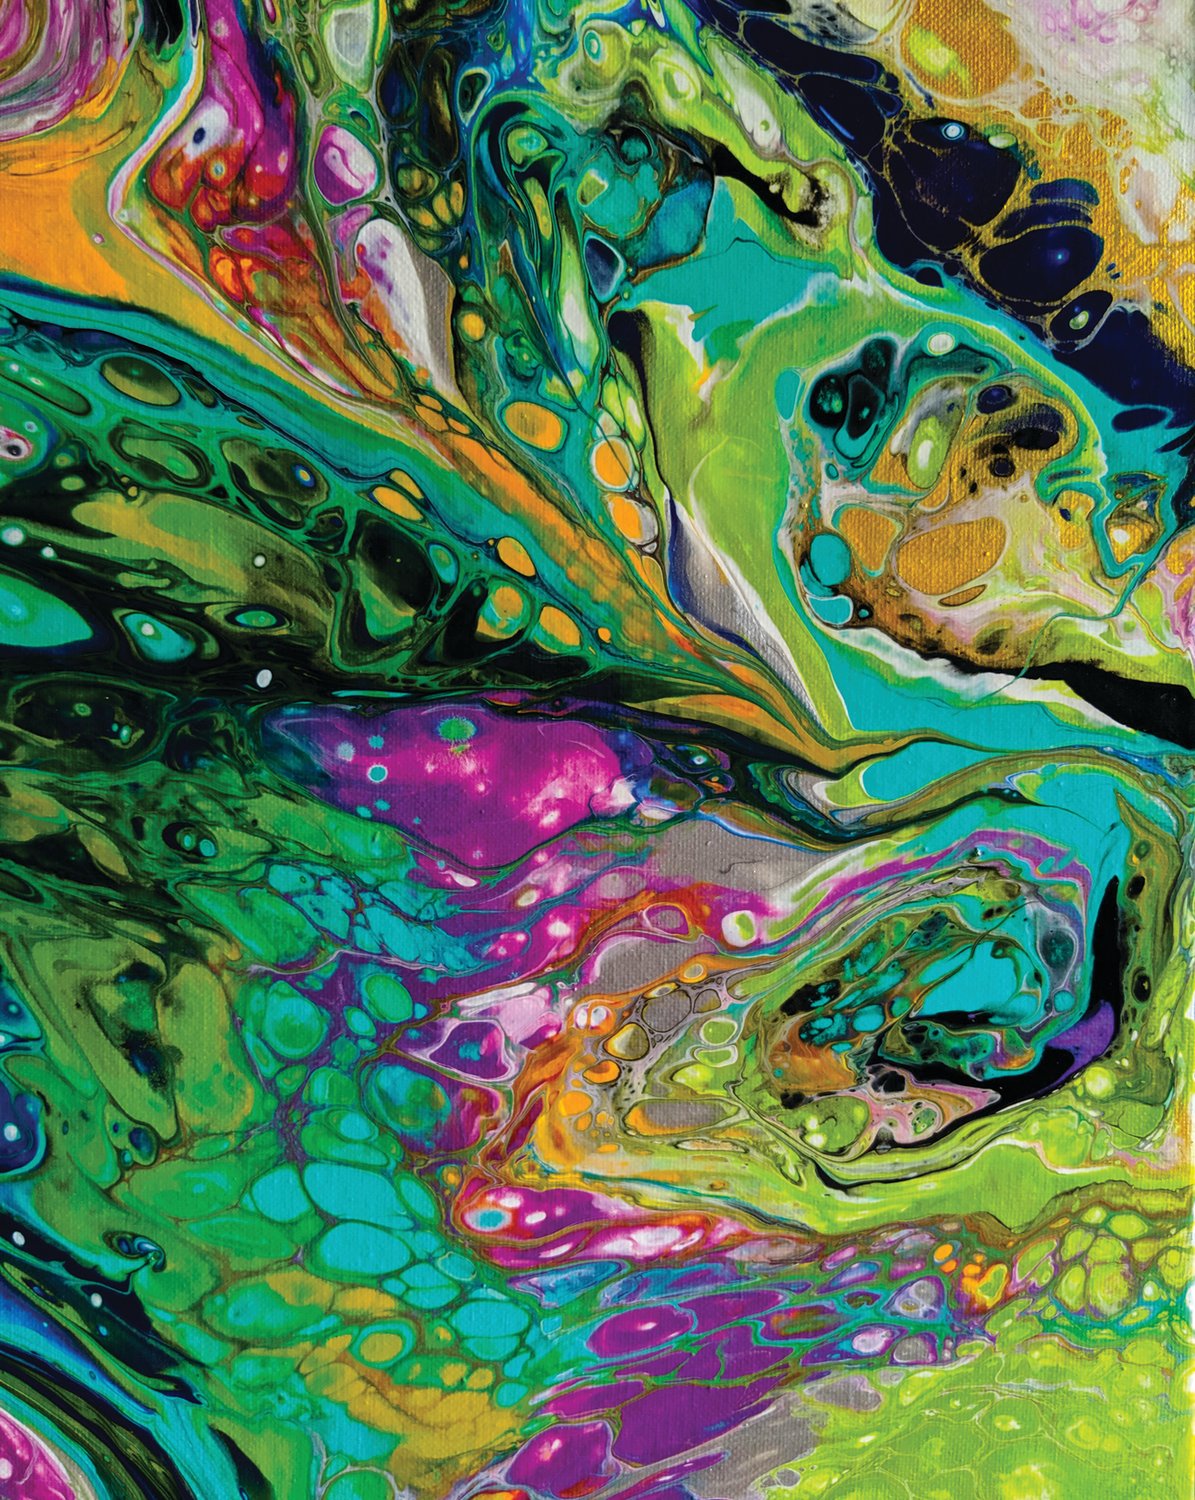 Local artist-muralist Laura Bray will give a one-night acrylic pouring demonstration and workshop Nov. 8 in Doylestown.